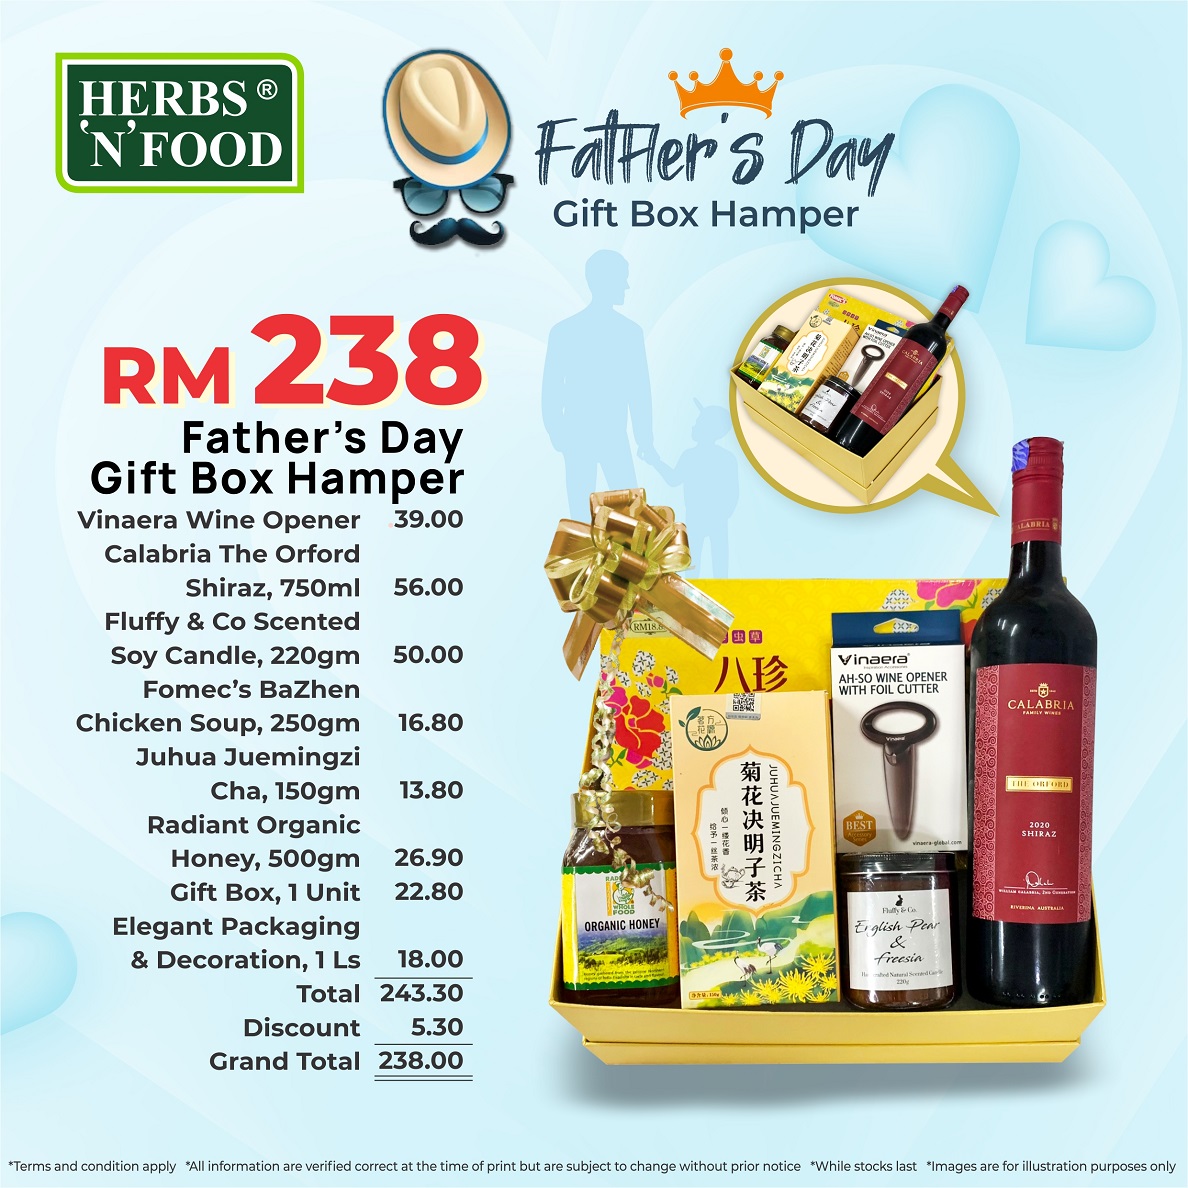 HNF FATHER’S DAY GIFT BOX HAMPER RM238